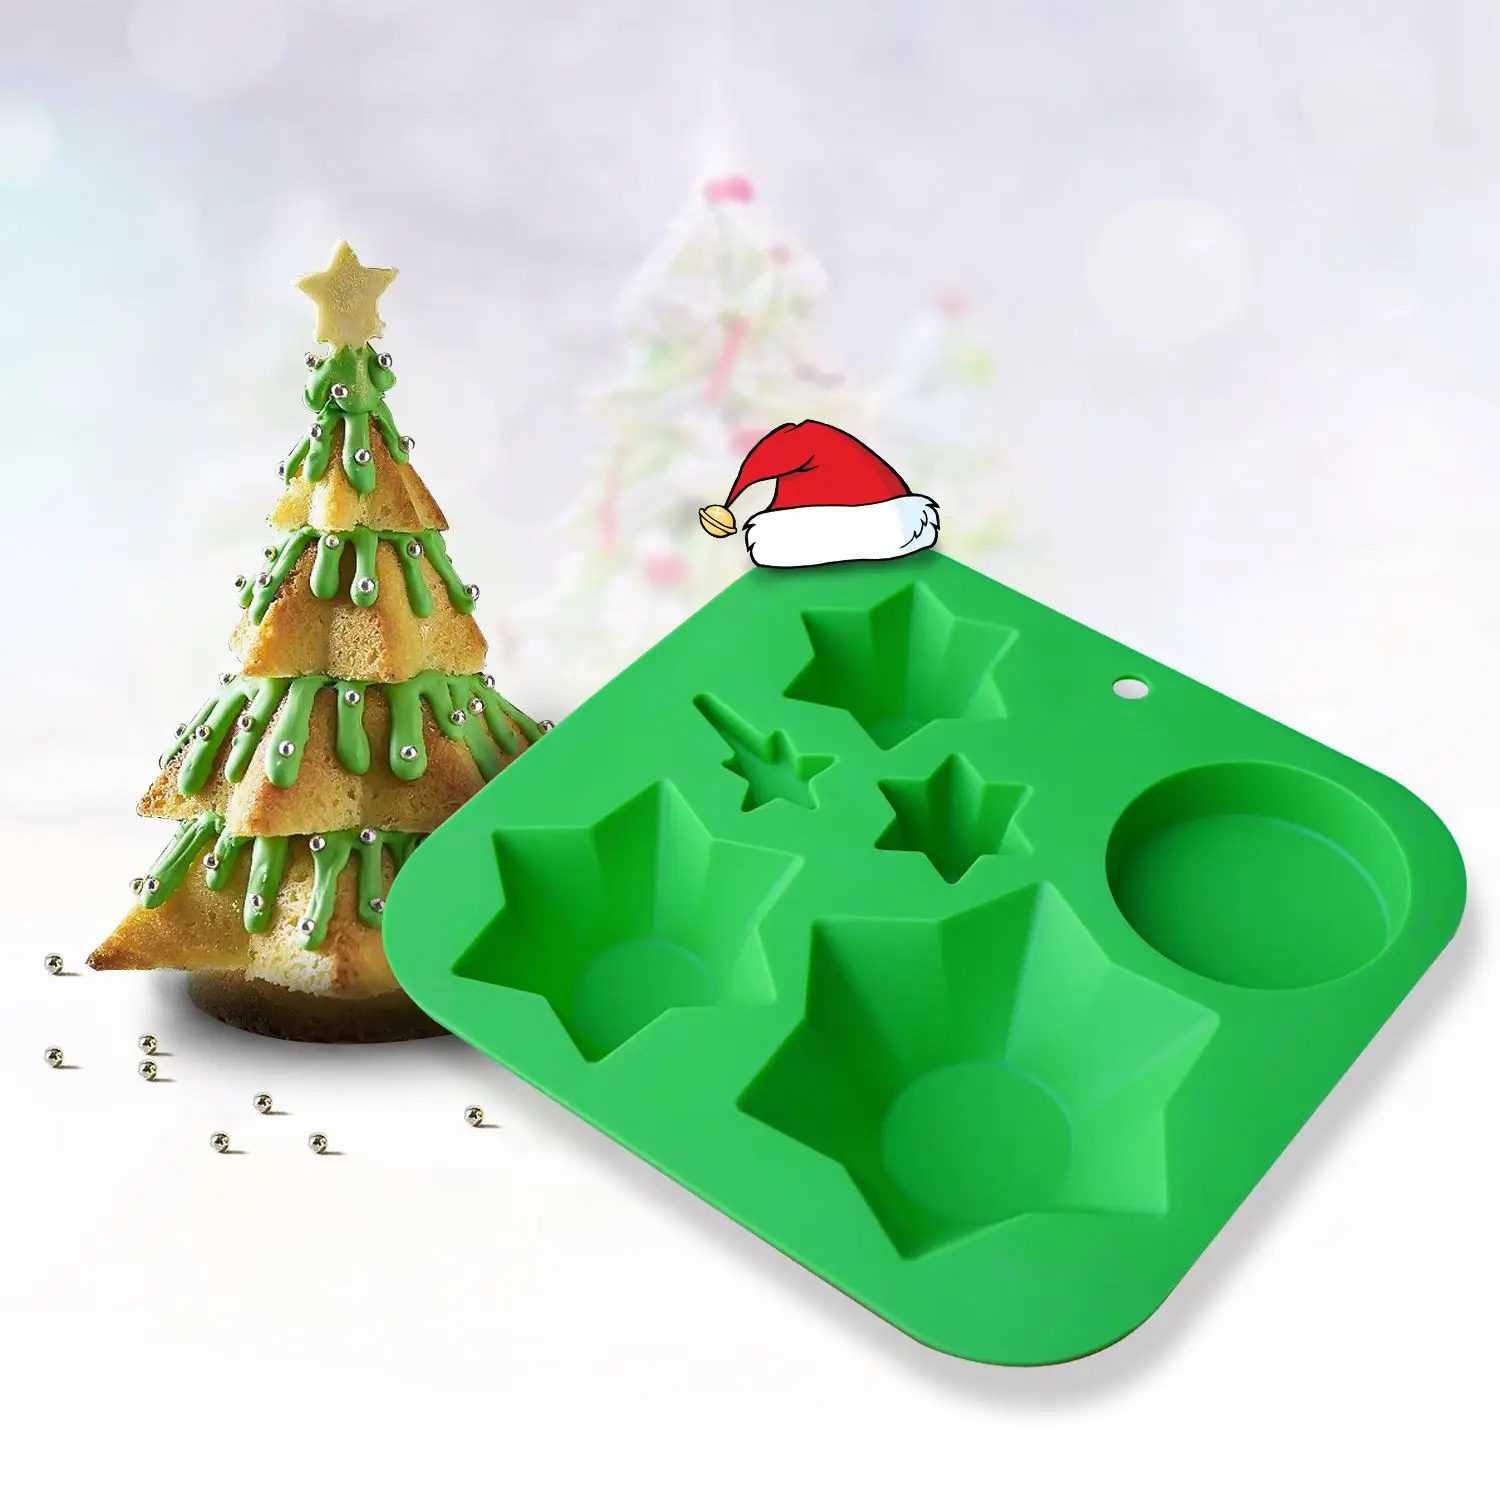 3D DIY Christmas Tree Shape Silicone Mold Food Grade silicone Material Cake Chocolate Soap Splicing Stack Tray